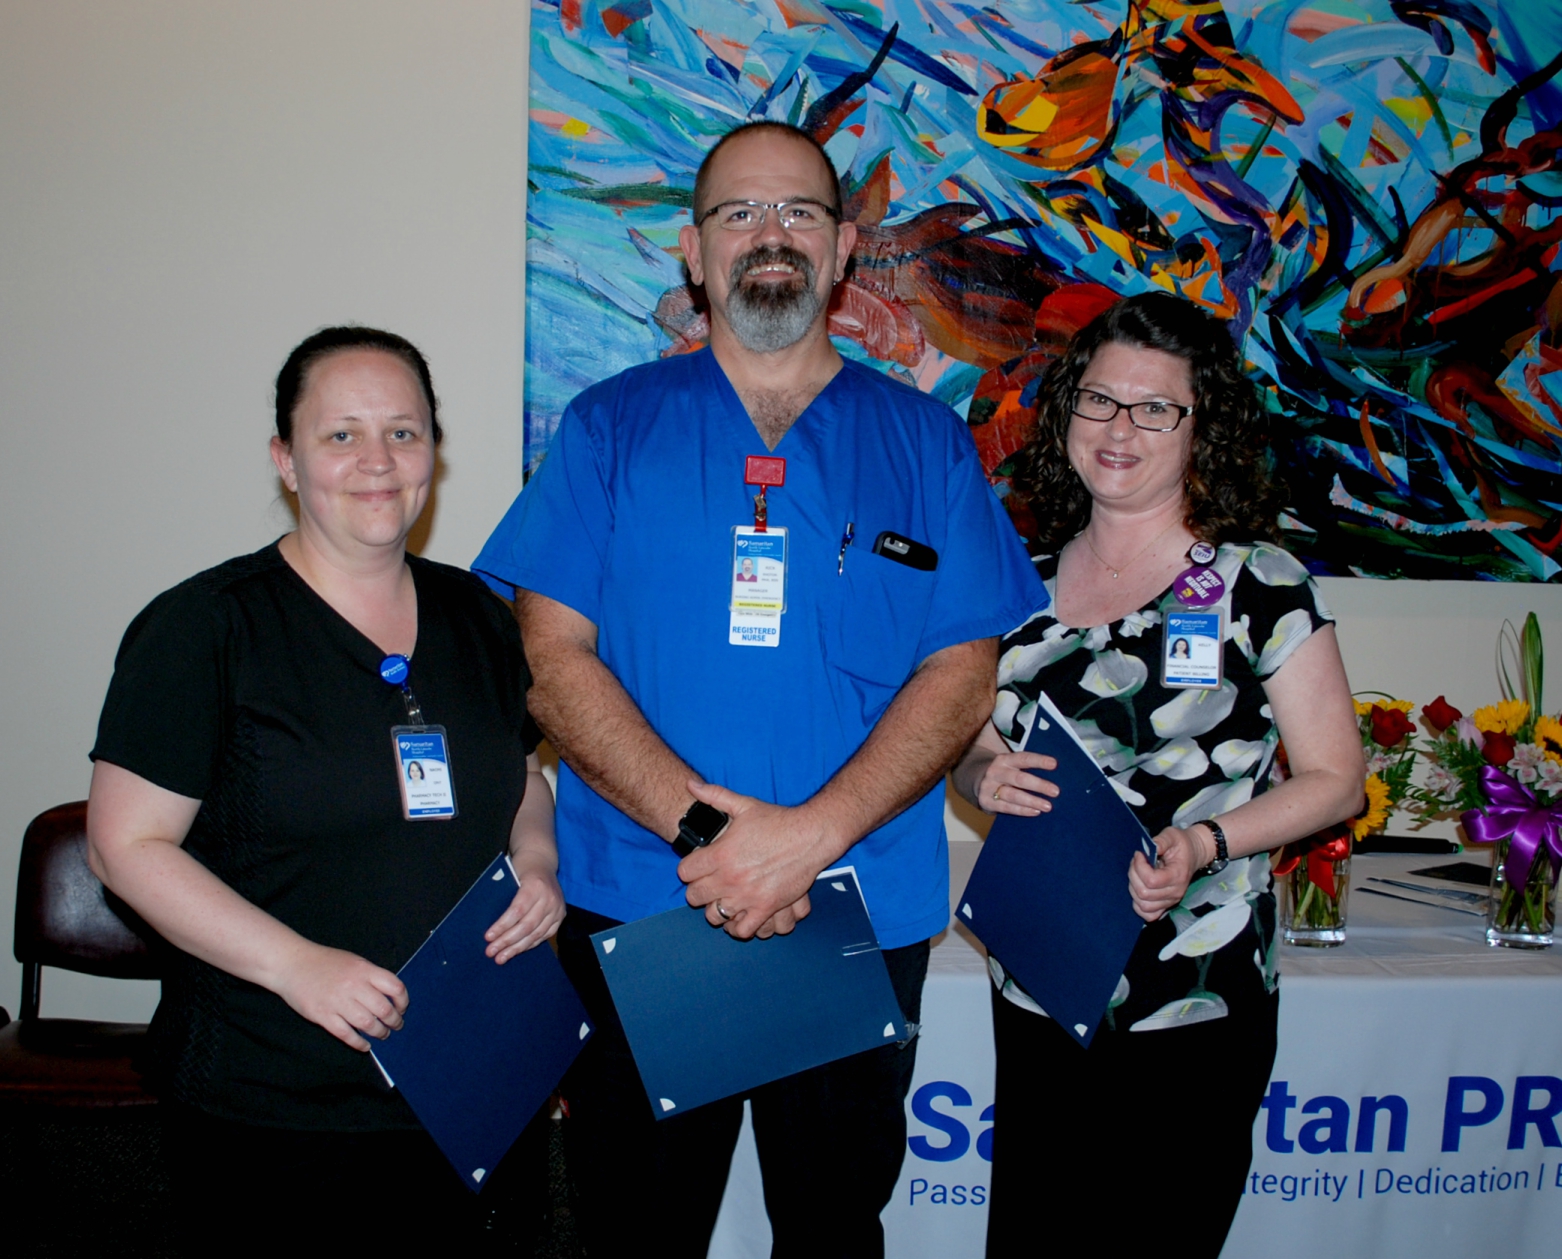 The 15-year employees who attended the ceremony were, from left, Naomi Carter, Rick Rhoton and Kelly Taylor.